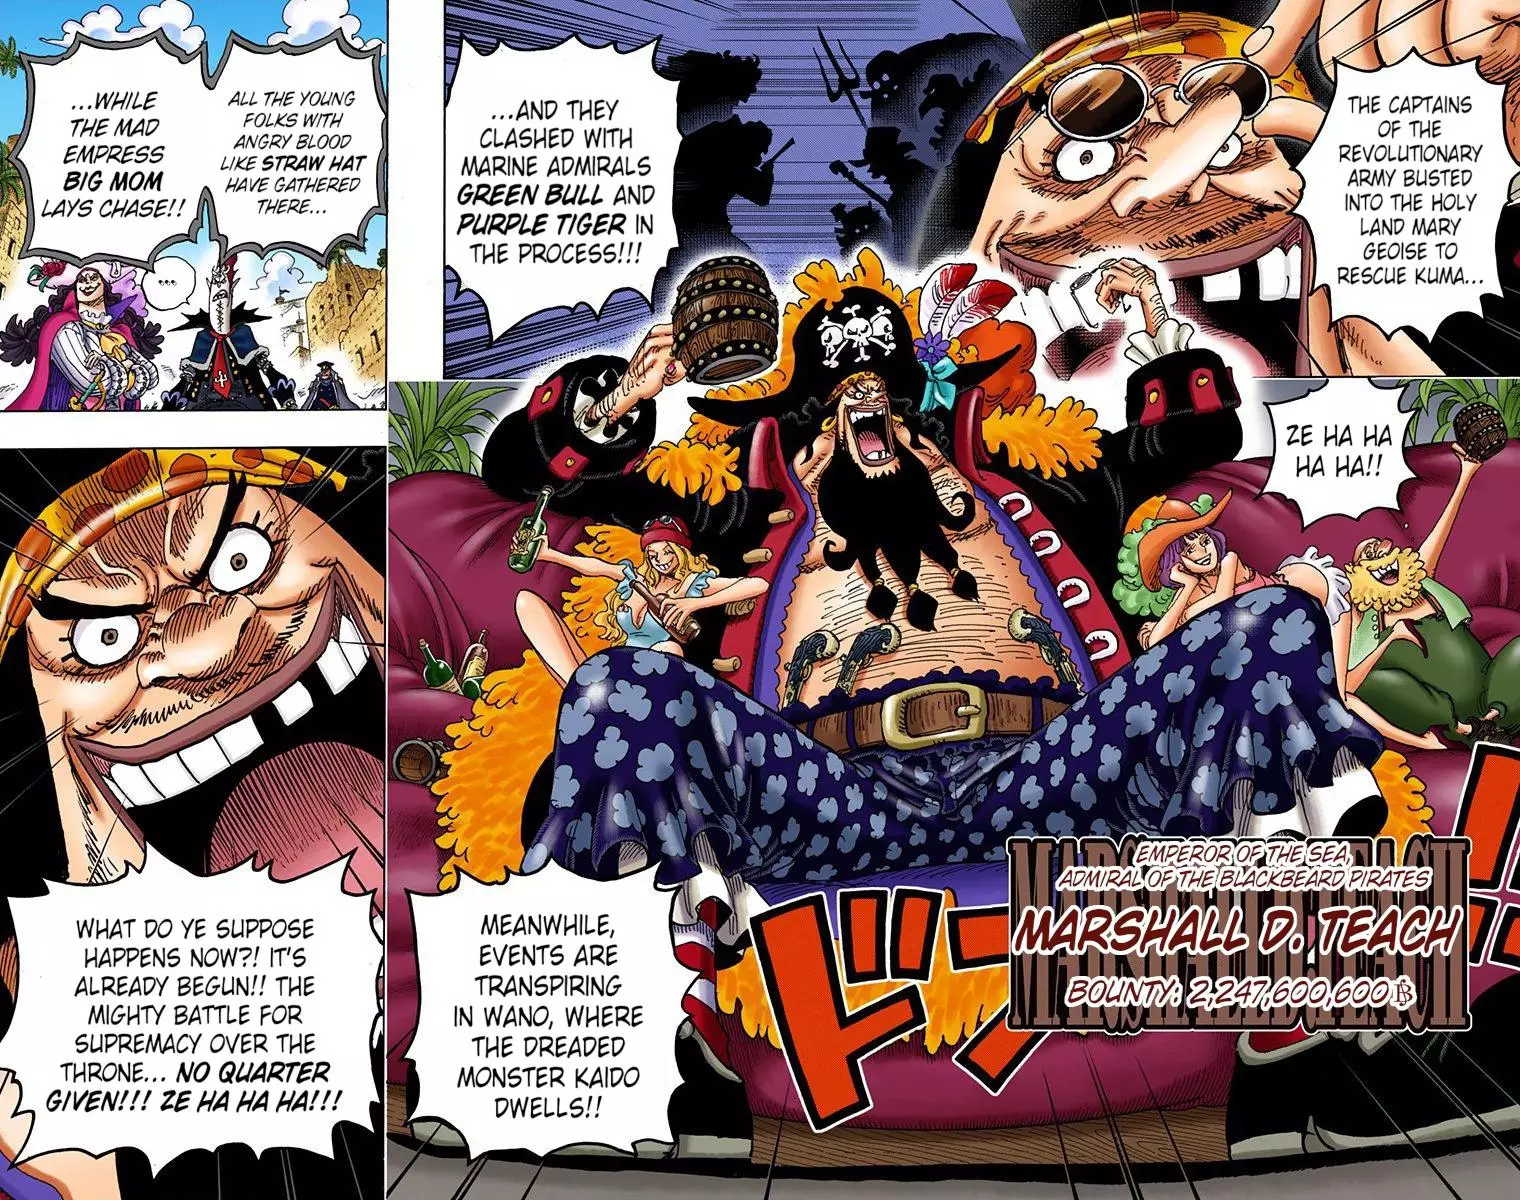 King and Queen One Piece 925 - Wano